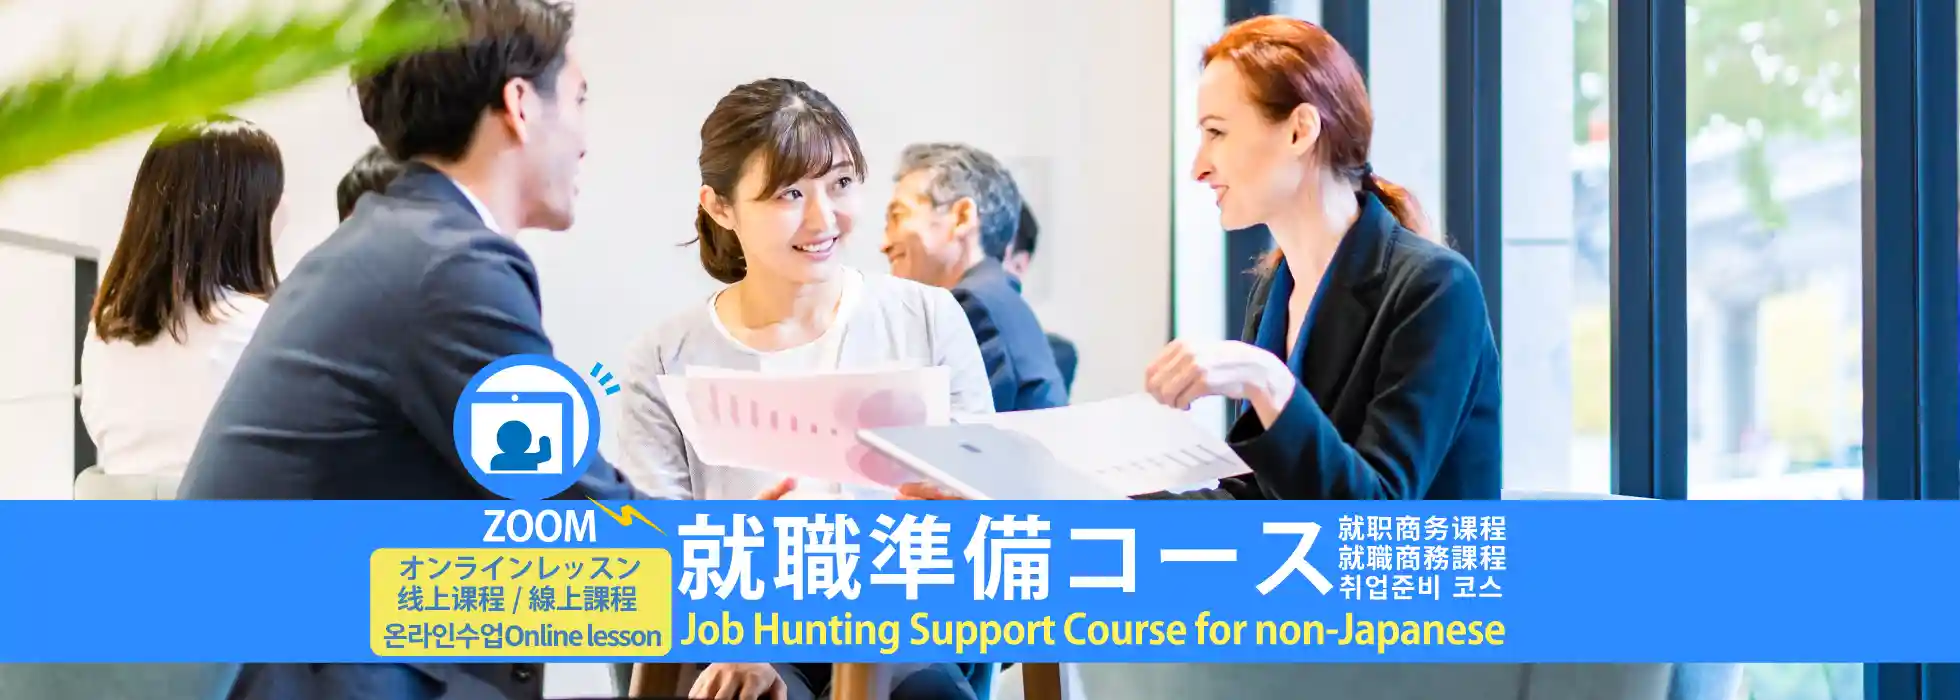 Job Hunting Support Course (Online Lessons)